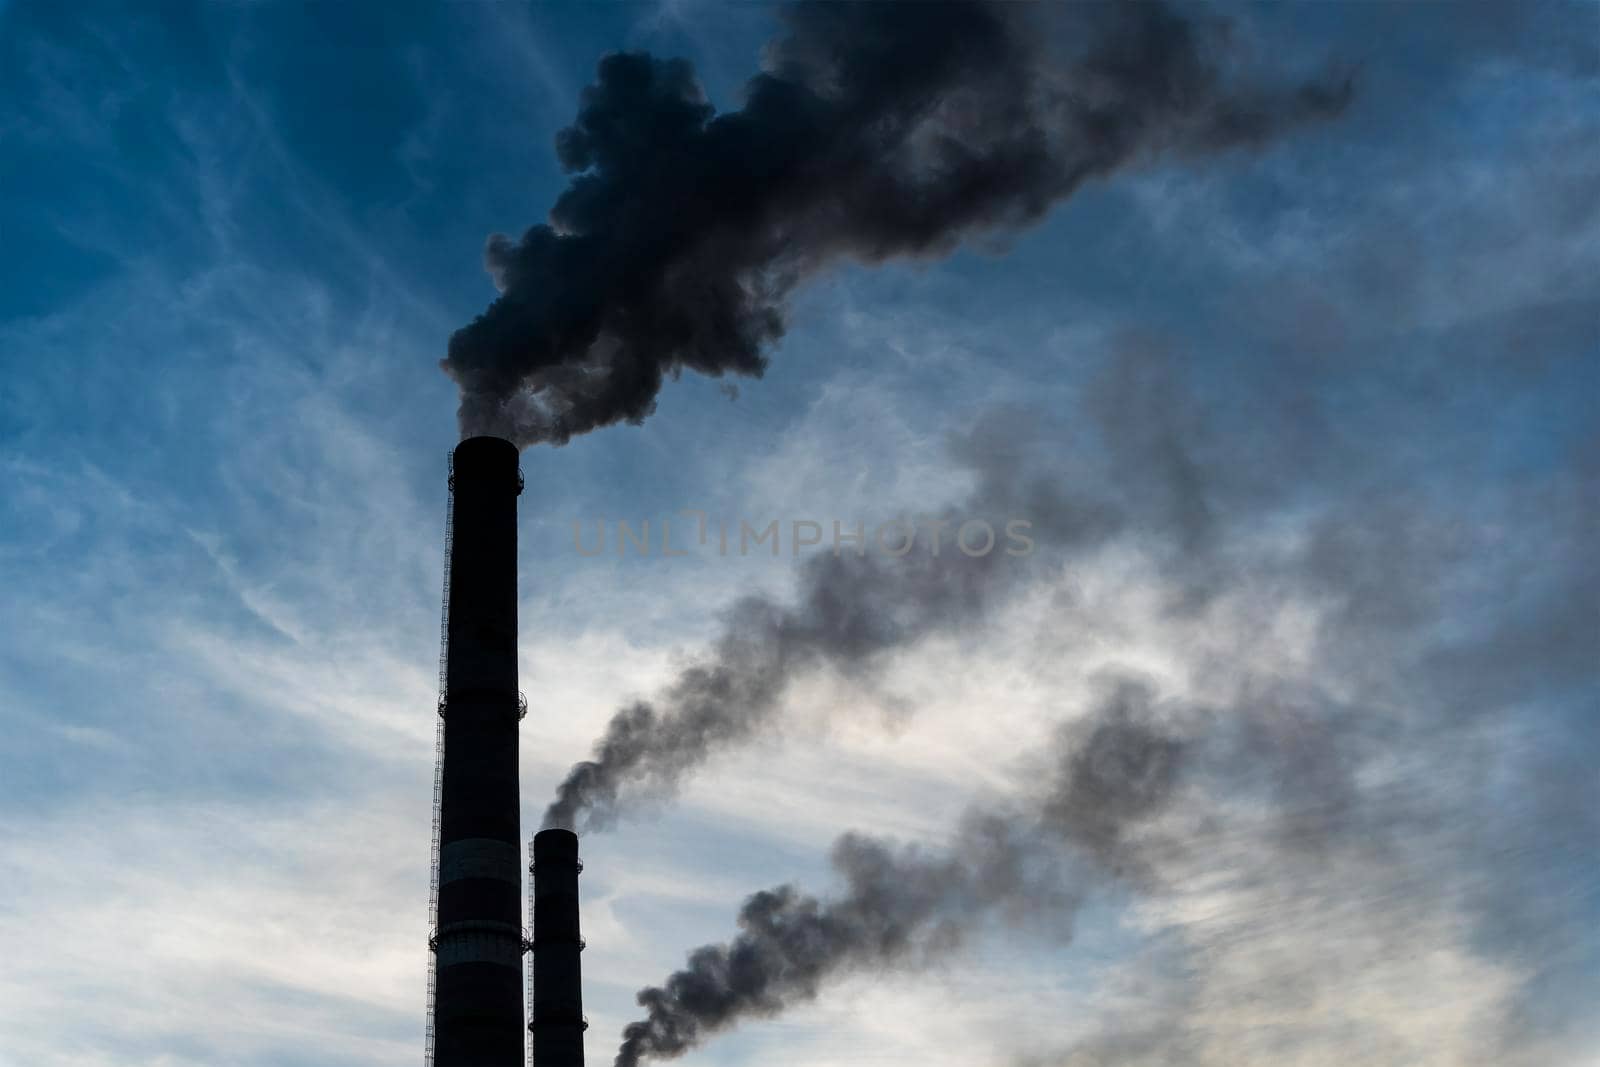 Smoking factory chimneys with co2 emissions.Environmental problem of environmental and air pollution.Climate change,ecology, global warming.The sky is smoky with toxic substances.Soot from factories by YevgeniySam